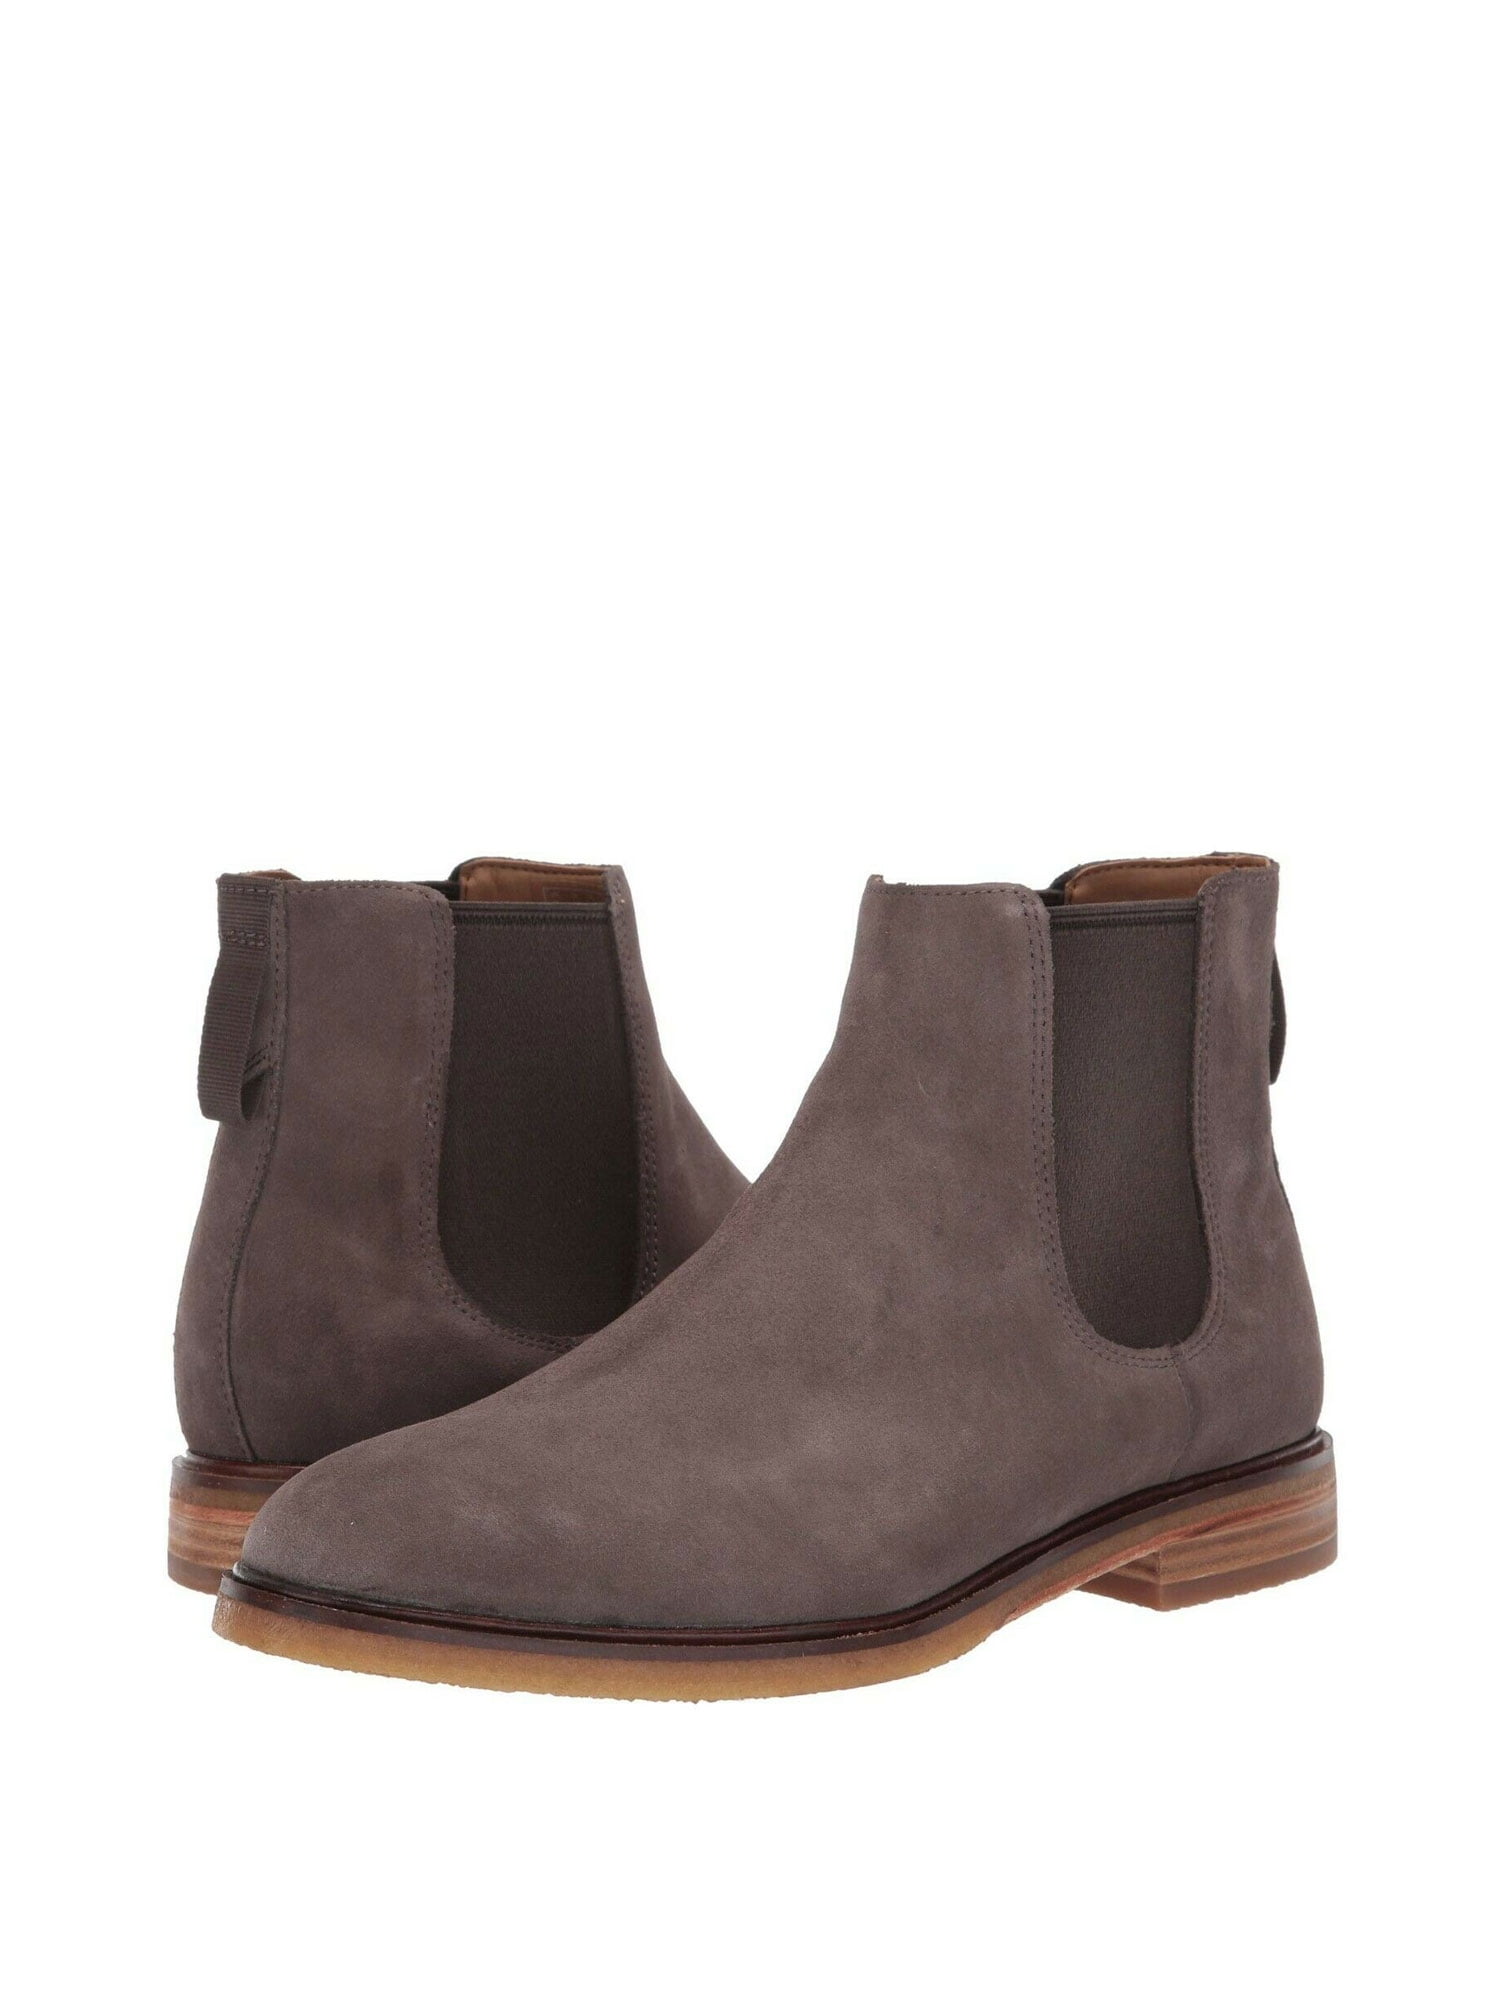 clarks chelsea boots review